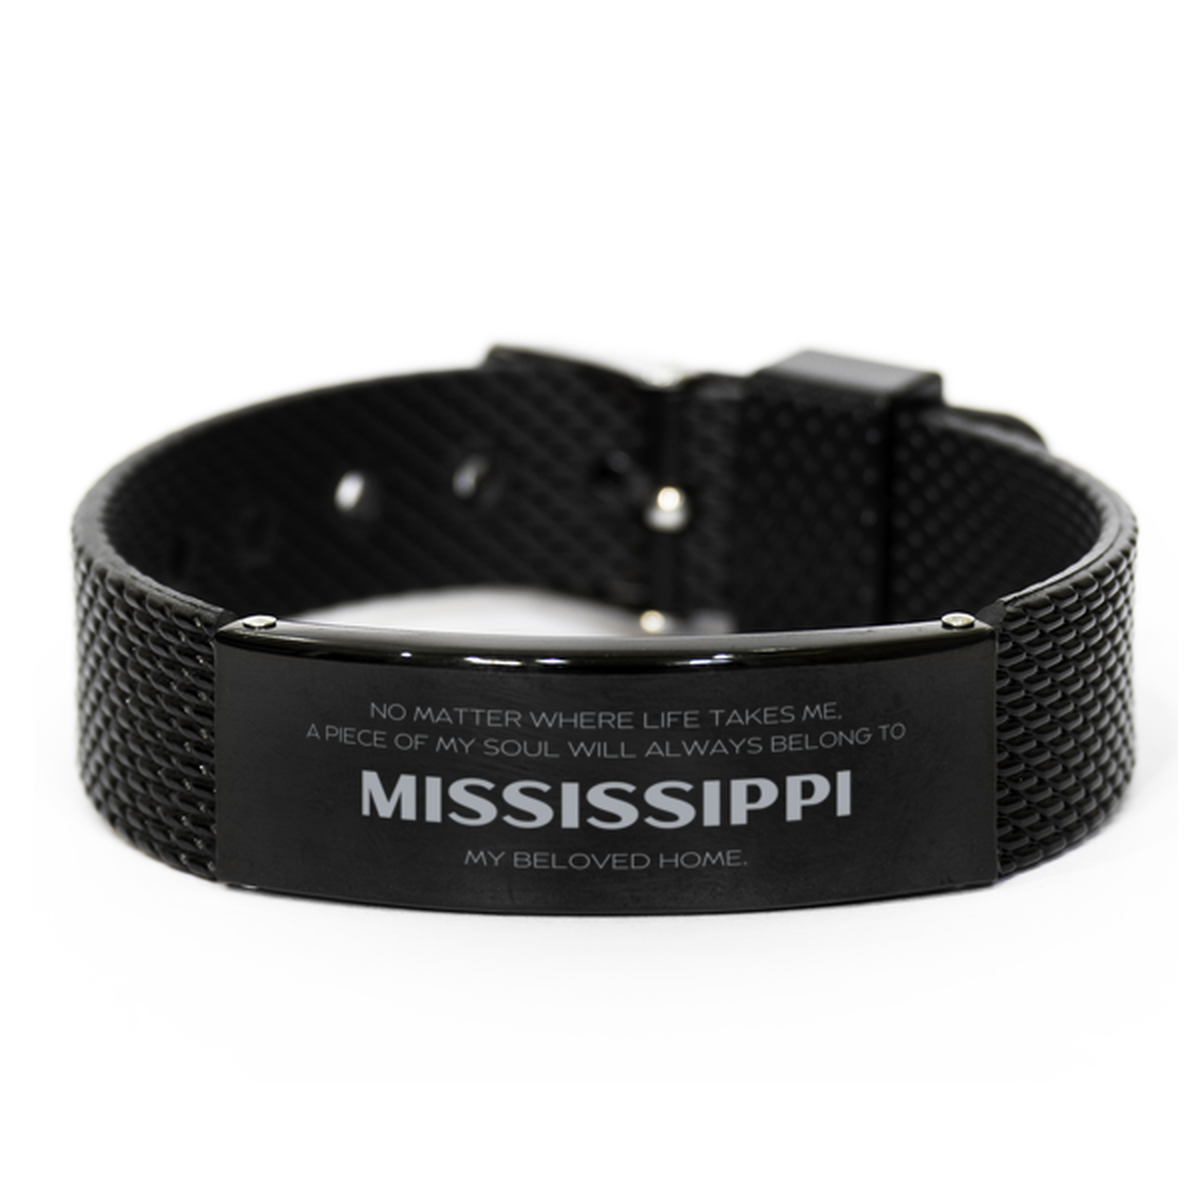 Love Mississippi State Gifts, My soul will always belong to Mississippi, Proud Black Shark Mesh Bracelet, Birthday Unique Gifts For Mississippi Men, Women, Friends